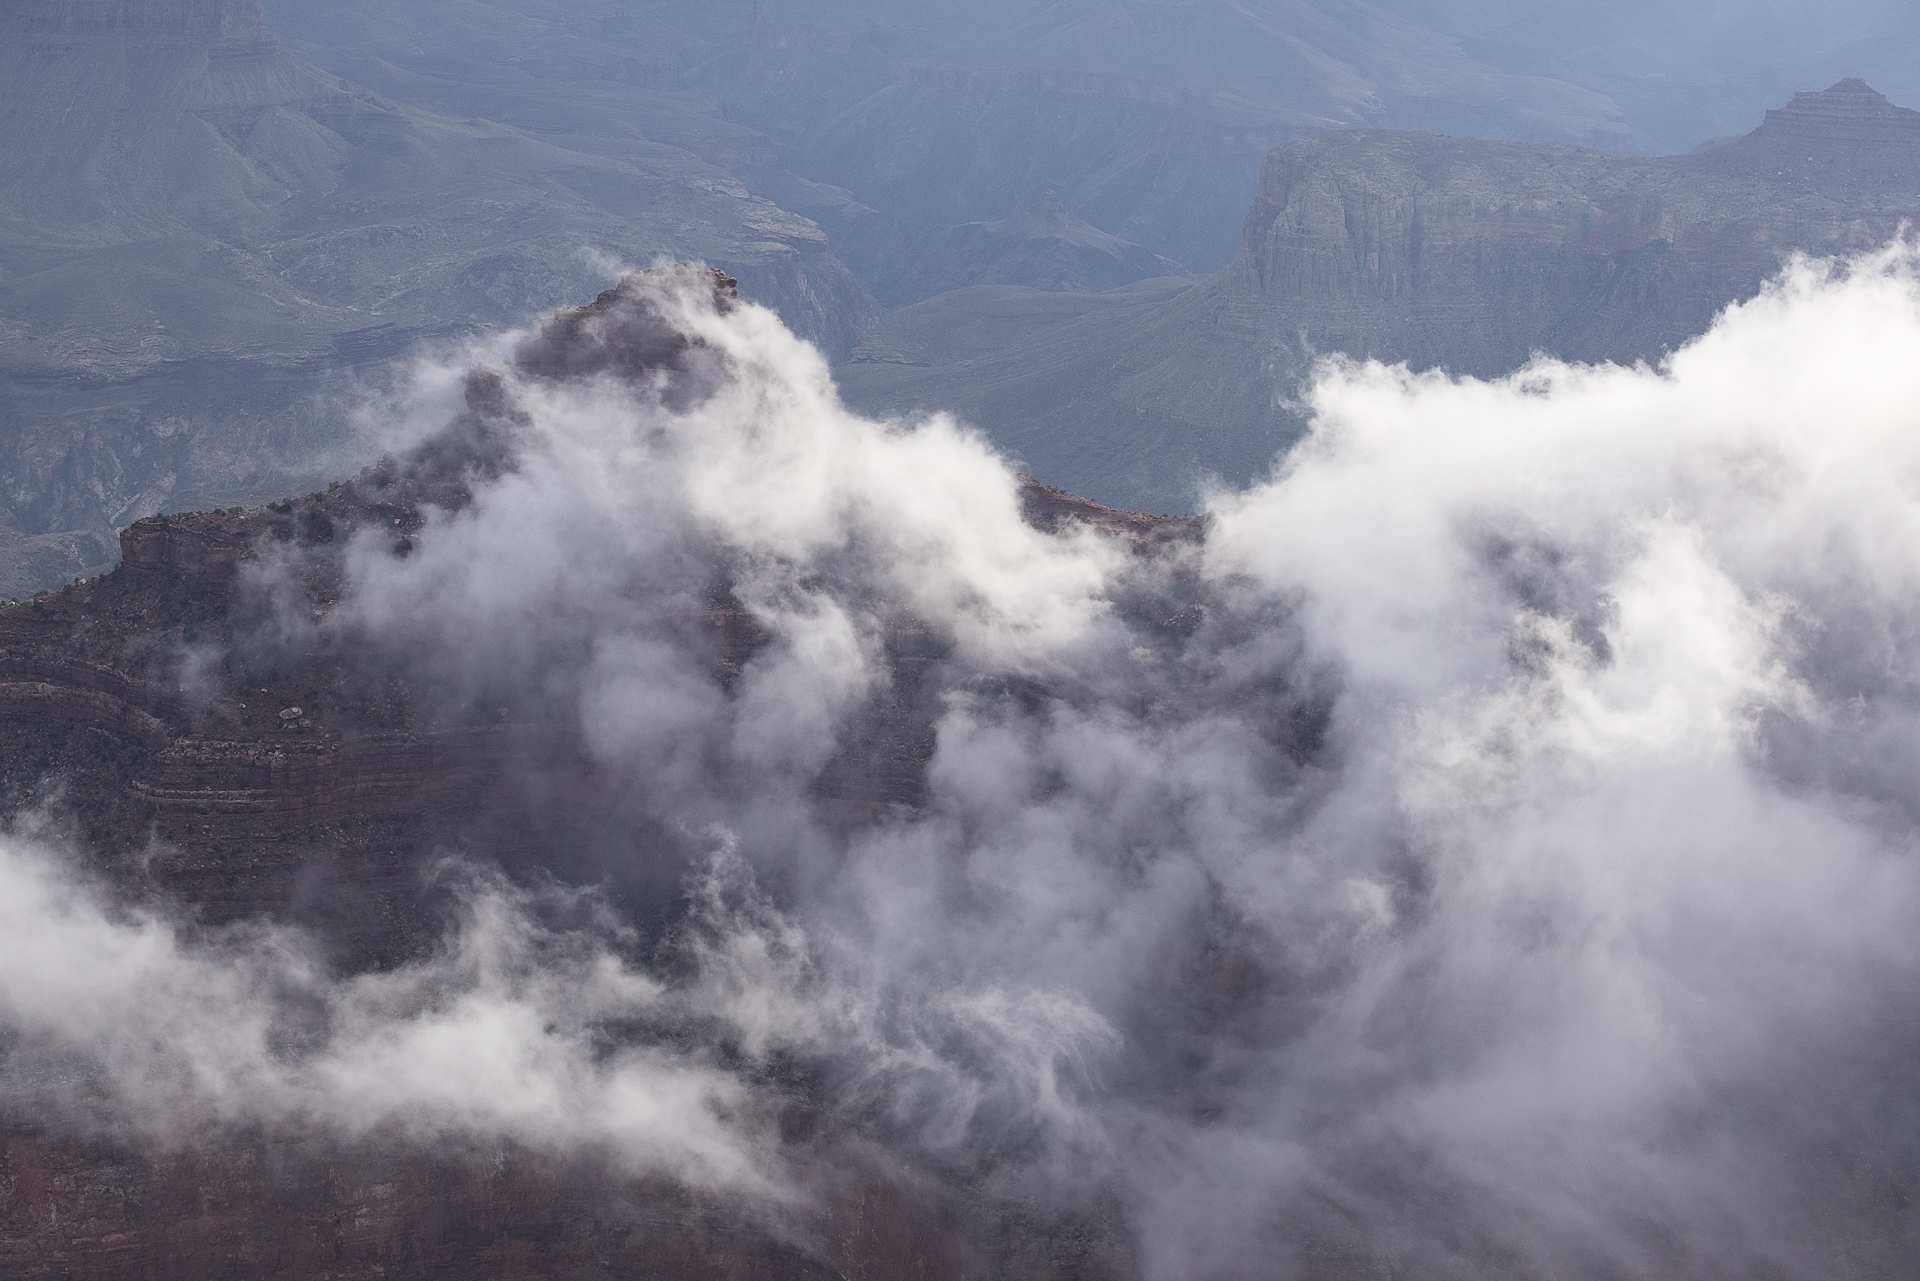 Clouds form over the Grand Canyon at Mather Point, AZ